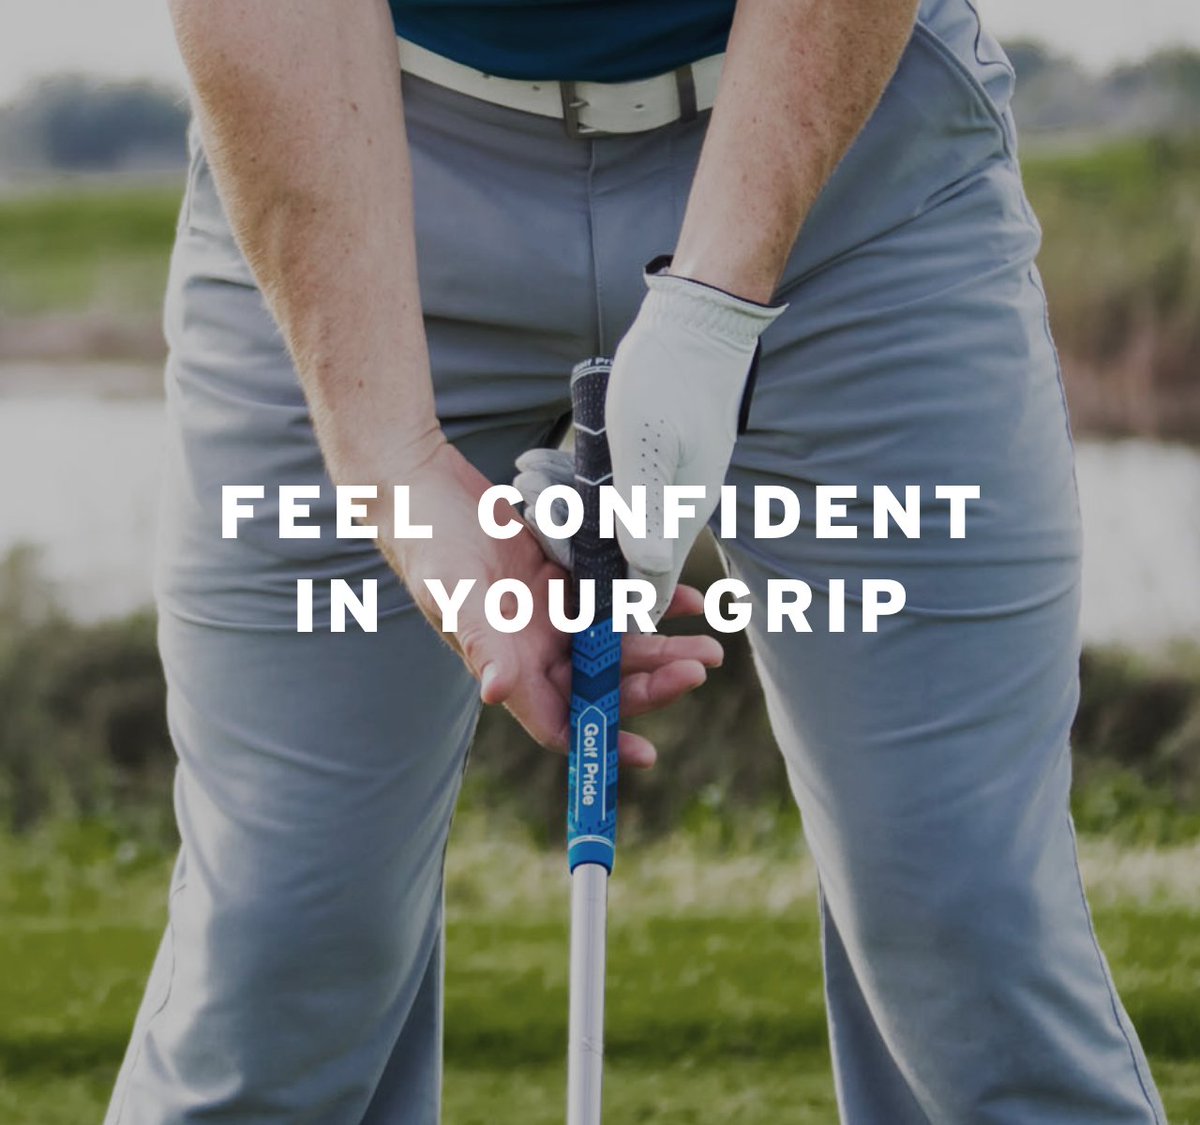 Unsure about your grip style? Swipe through for key considerations as you ID your next grip…